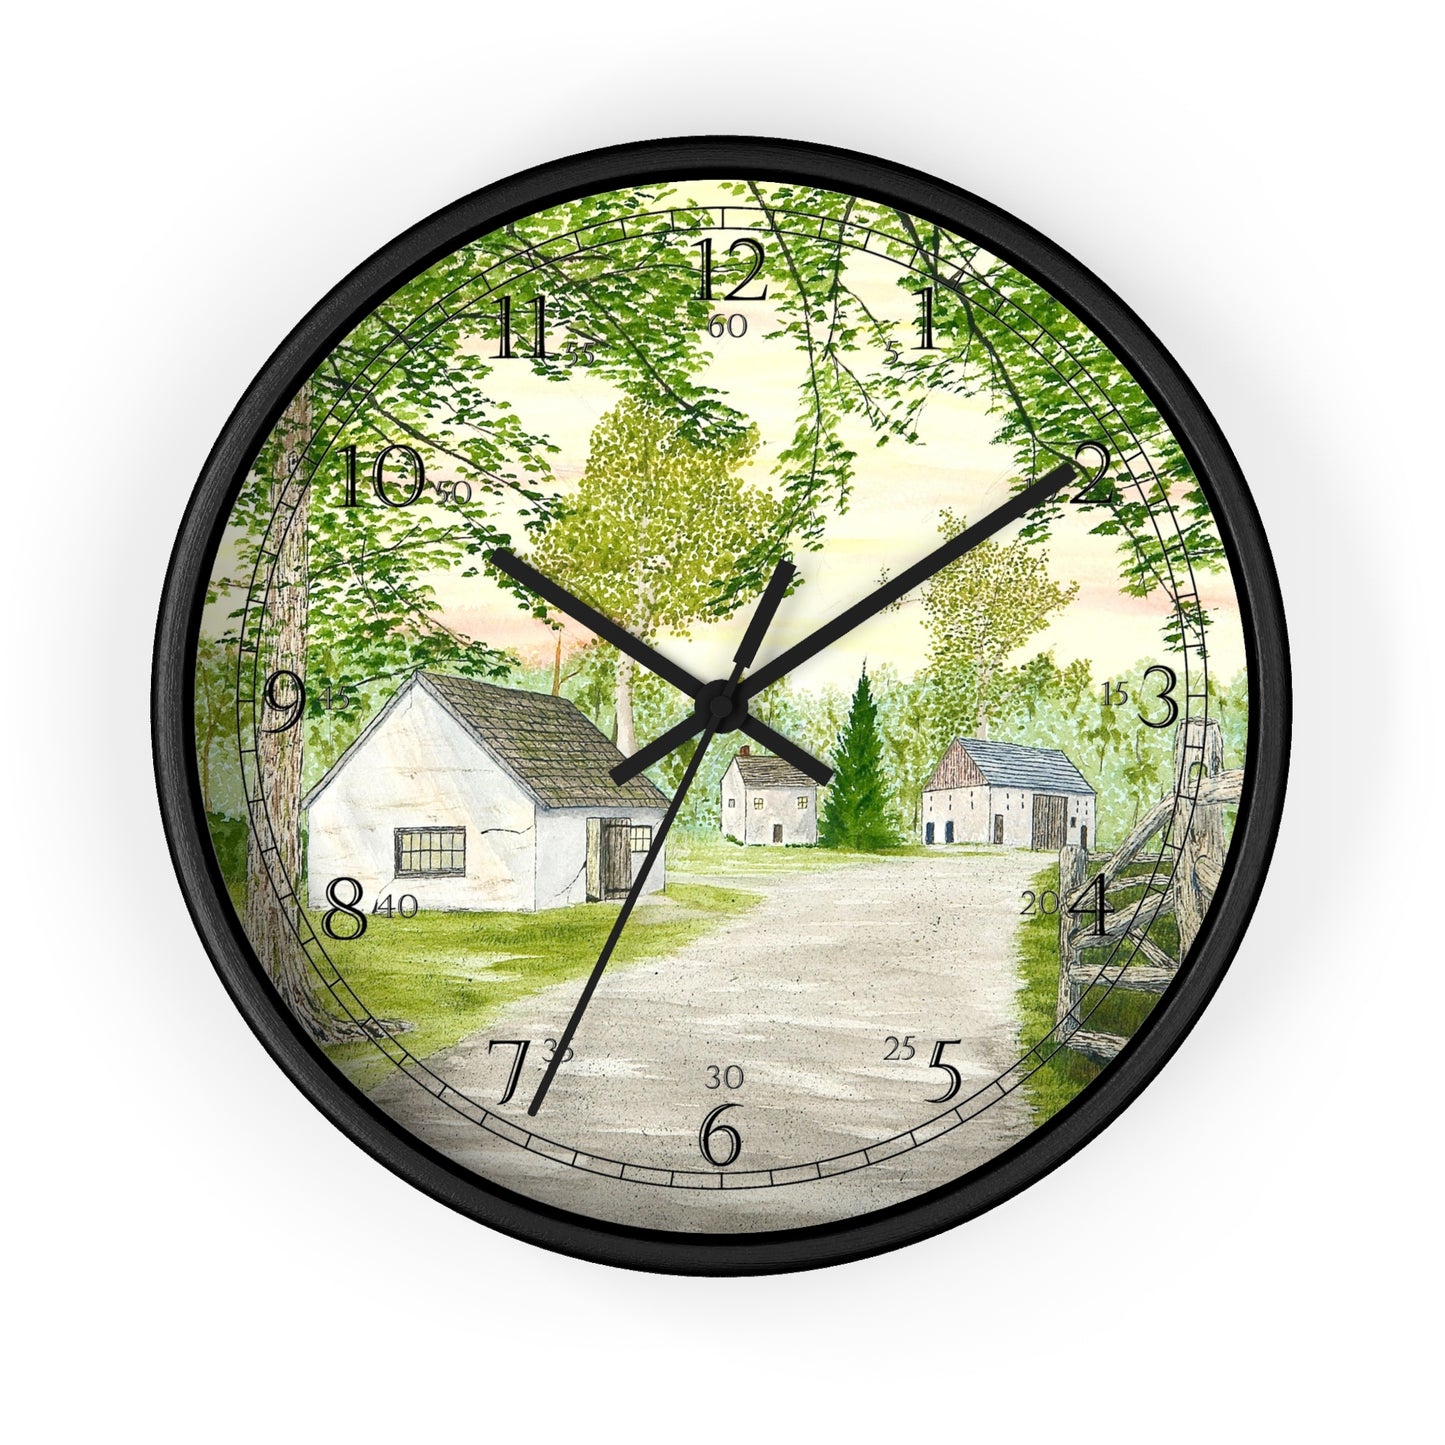 The Country Lane and Fence English Numeral Clock features a reproduction of a watercolor painting by artist Lee M. Buchanan. This charming clock will add a warm and welcoming touch to any room in your home.